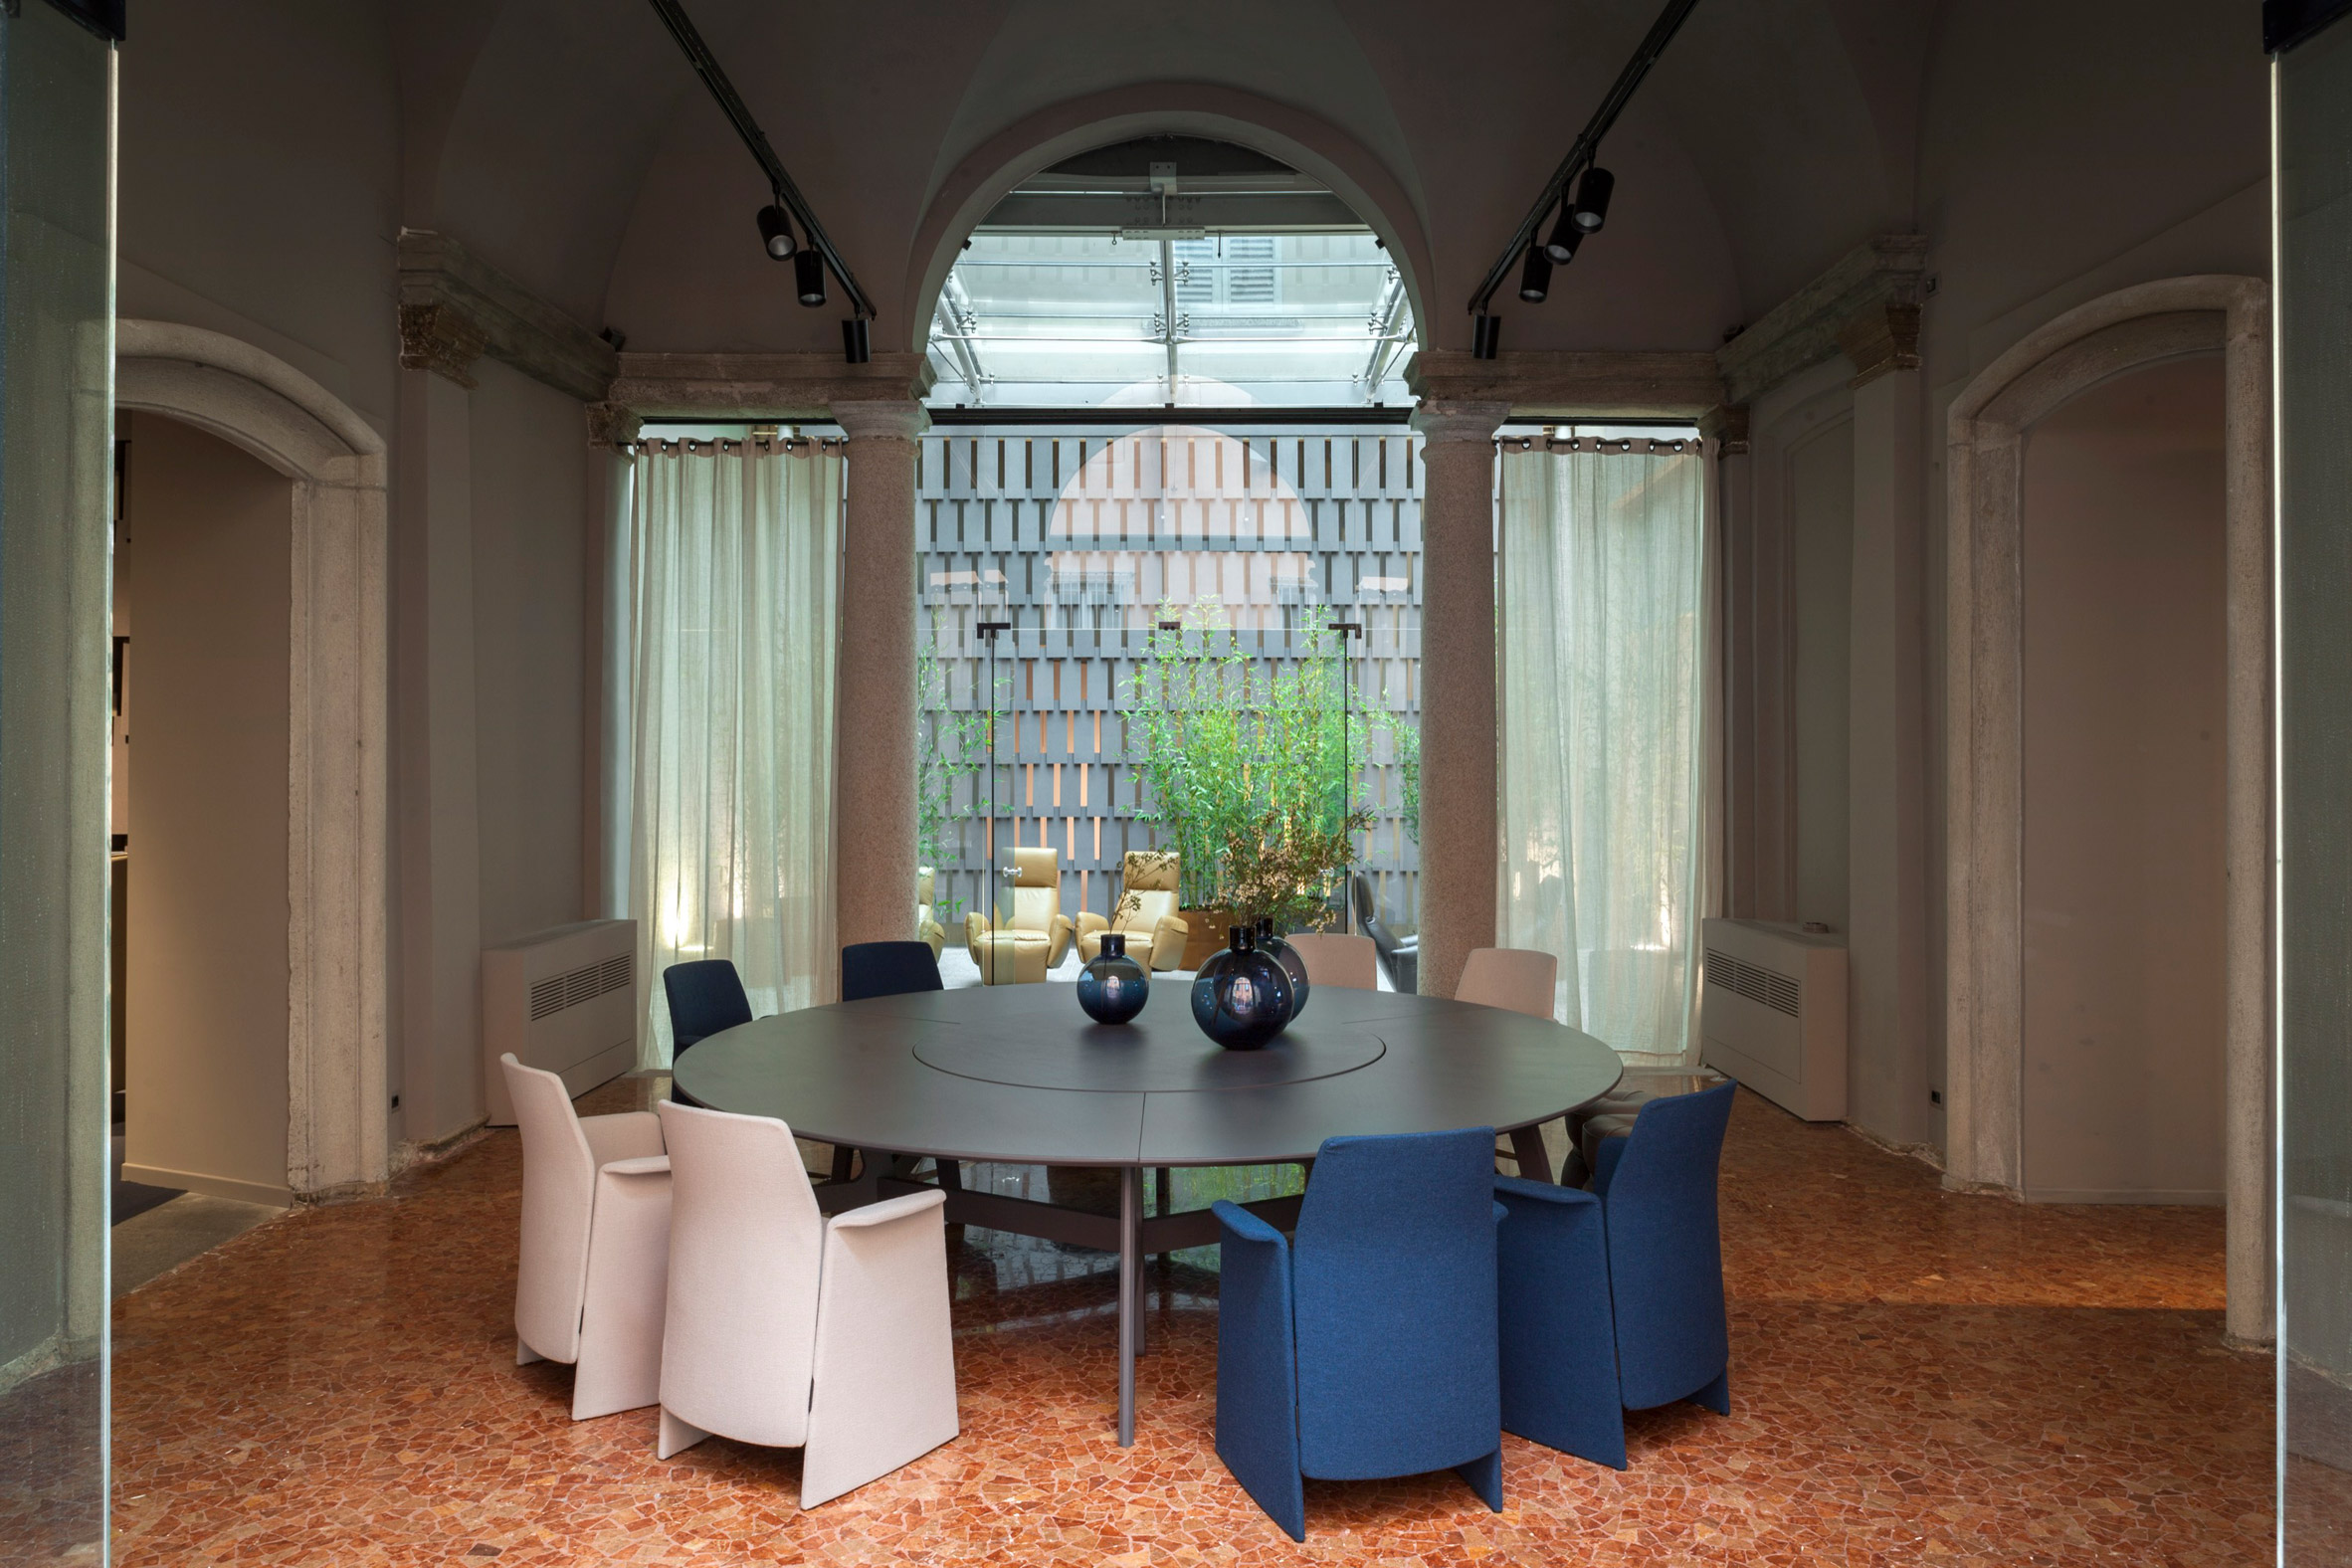 Michele De Lucchi takes over Poltrona Frau showroom for Milan Design Week